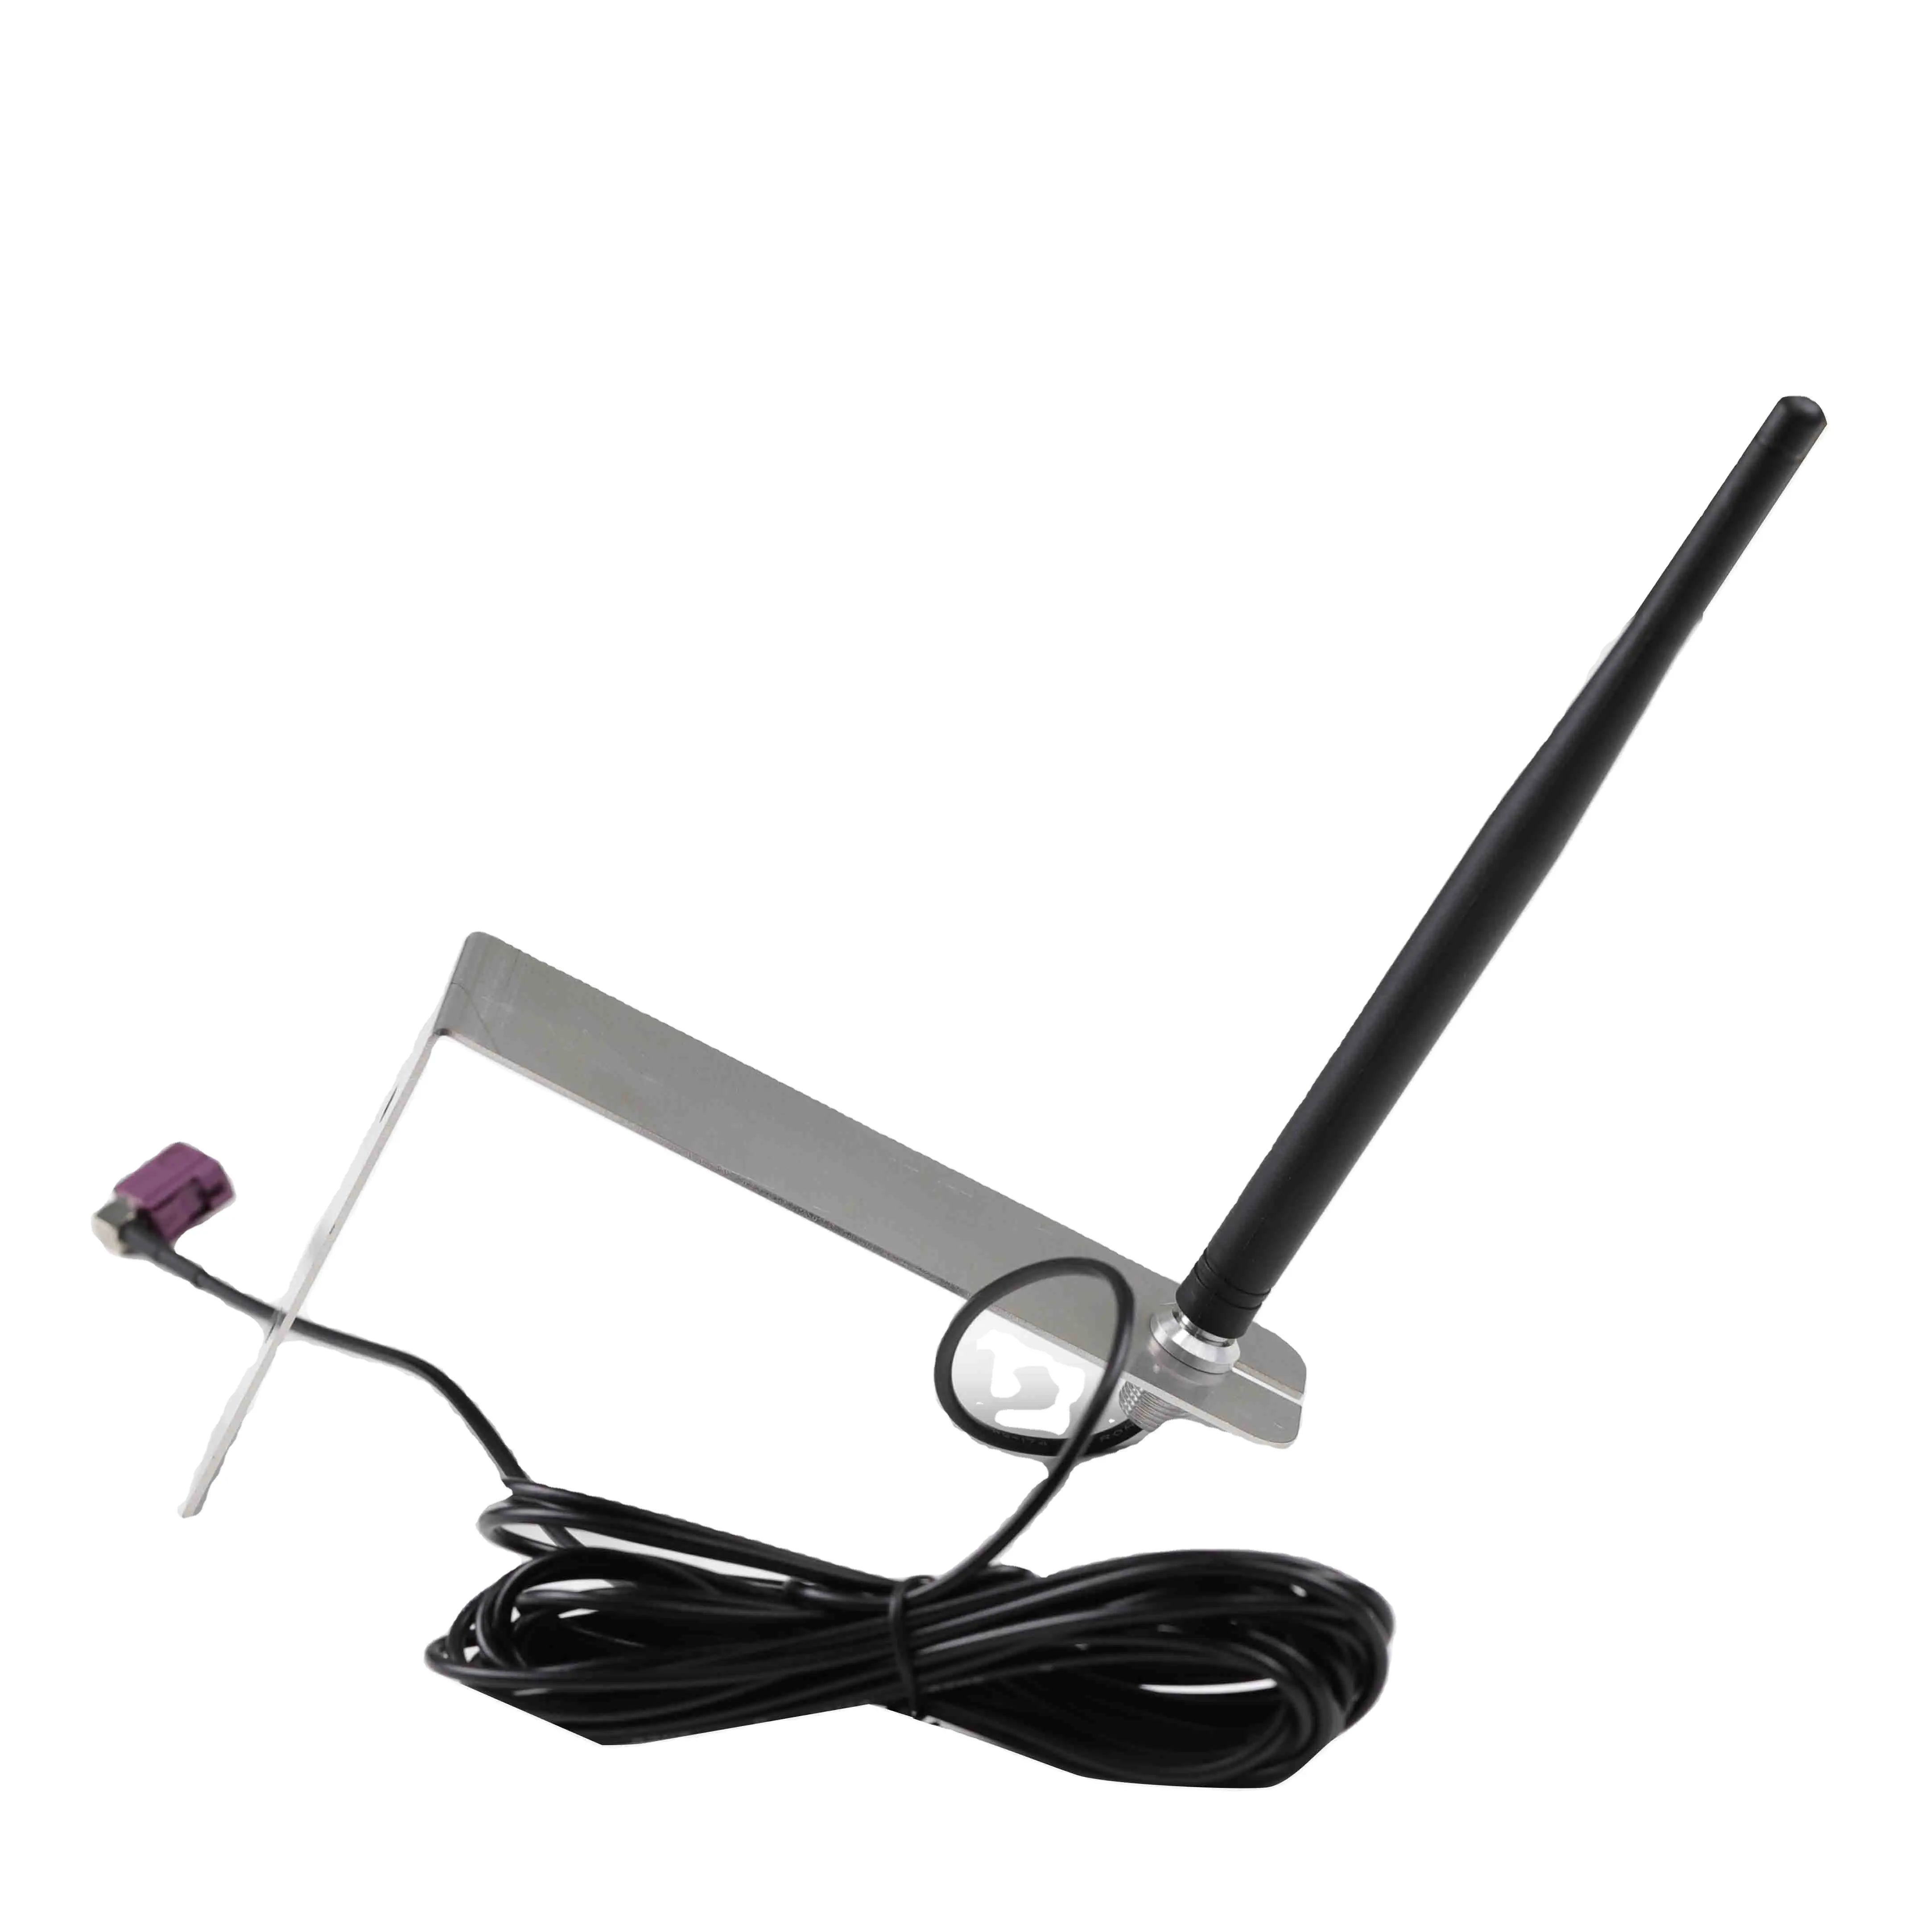 Dual band GSM WIFI 3G 4G LTE antenna high gain 9dbi spring wifi antenna with sma male